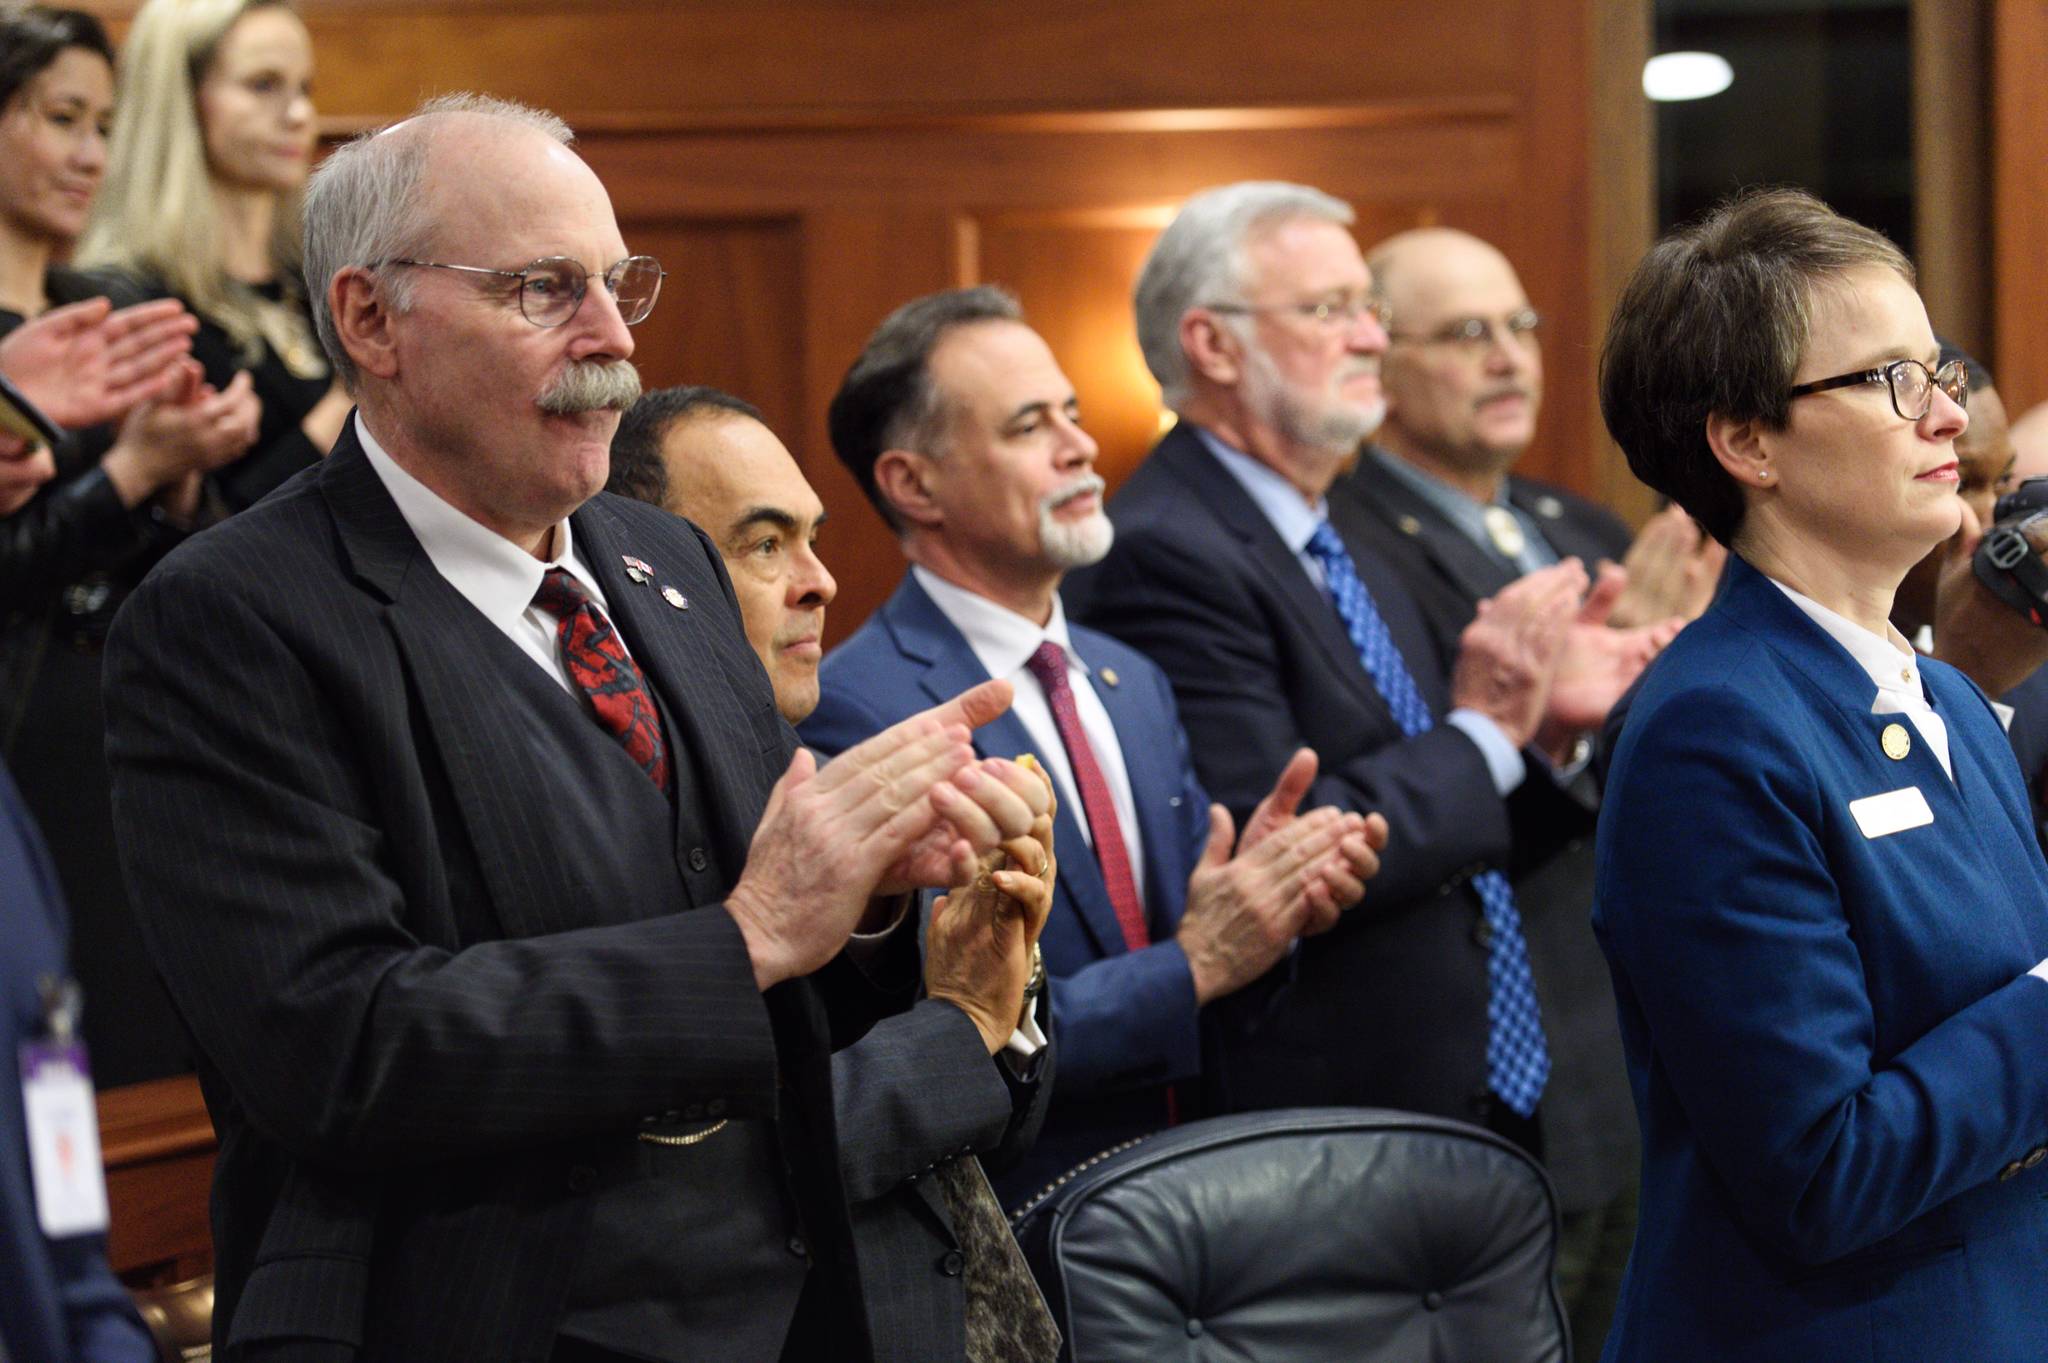 Senators react to Gov. Mike Dunleavy’s State of the State address on Tuesday. (Michael Penn | Juneau Empire)